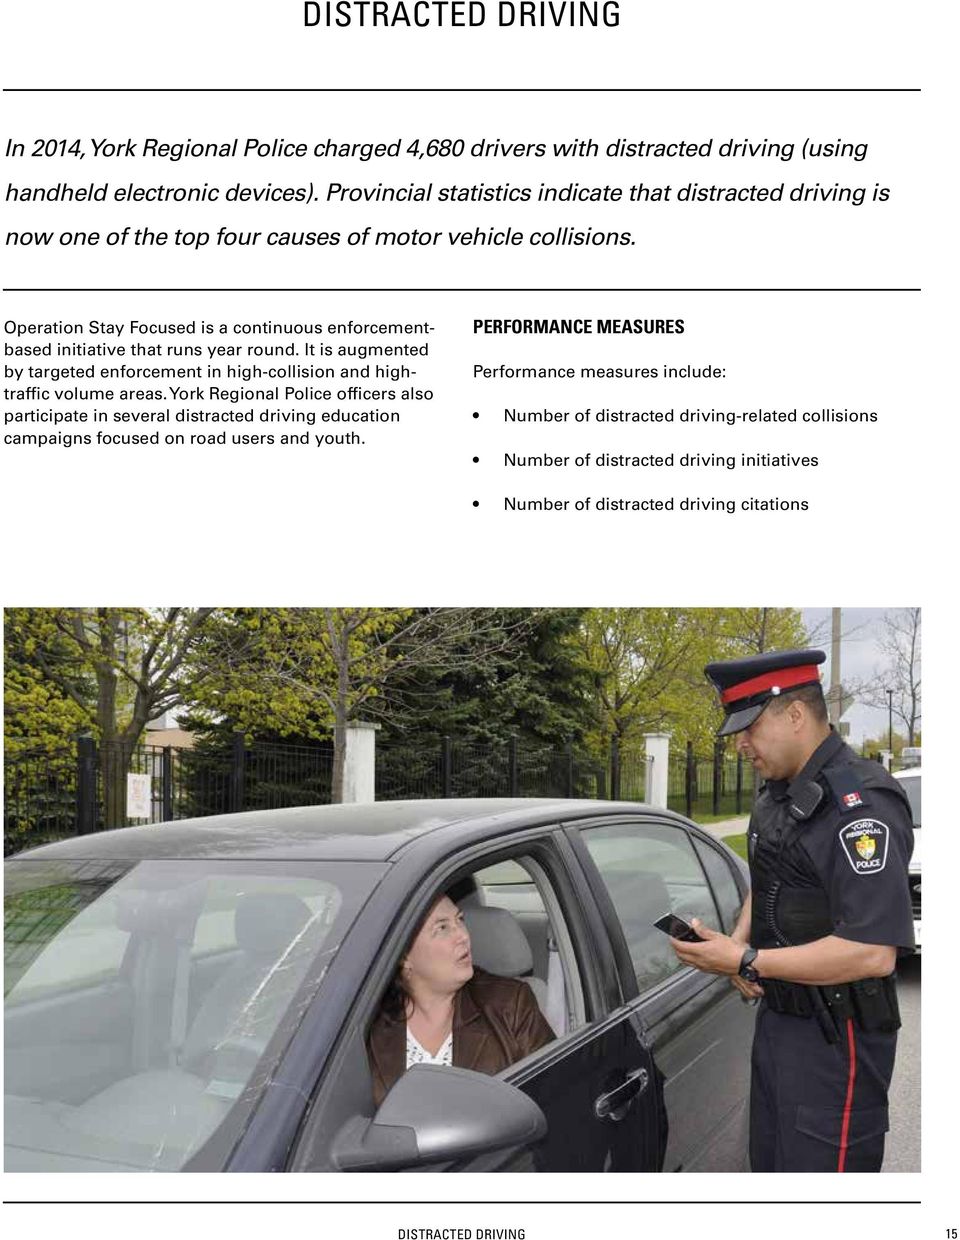 Operation Stay Focused is a continuous enforcementbased initiative that runs year round. It is augmented by targeted enforcement in high-collision and hightraffic volume areas.